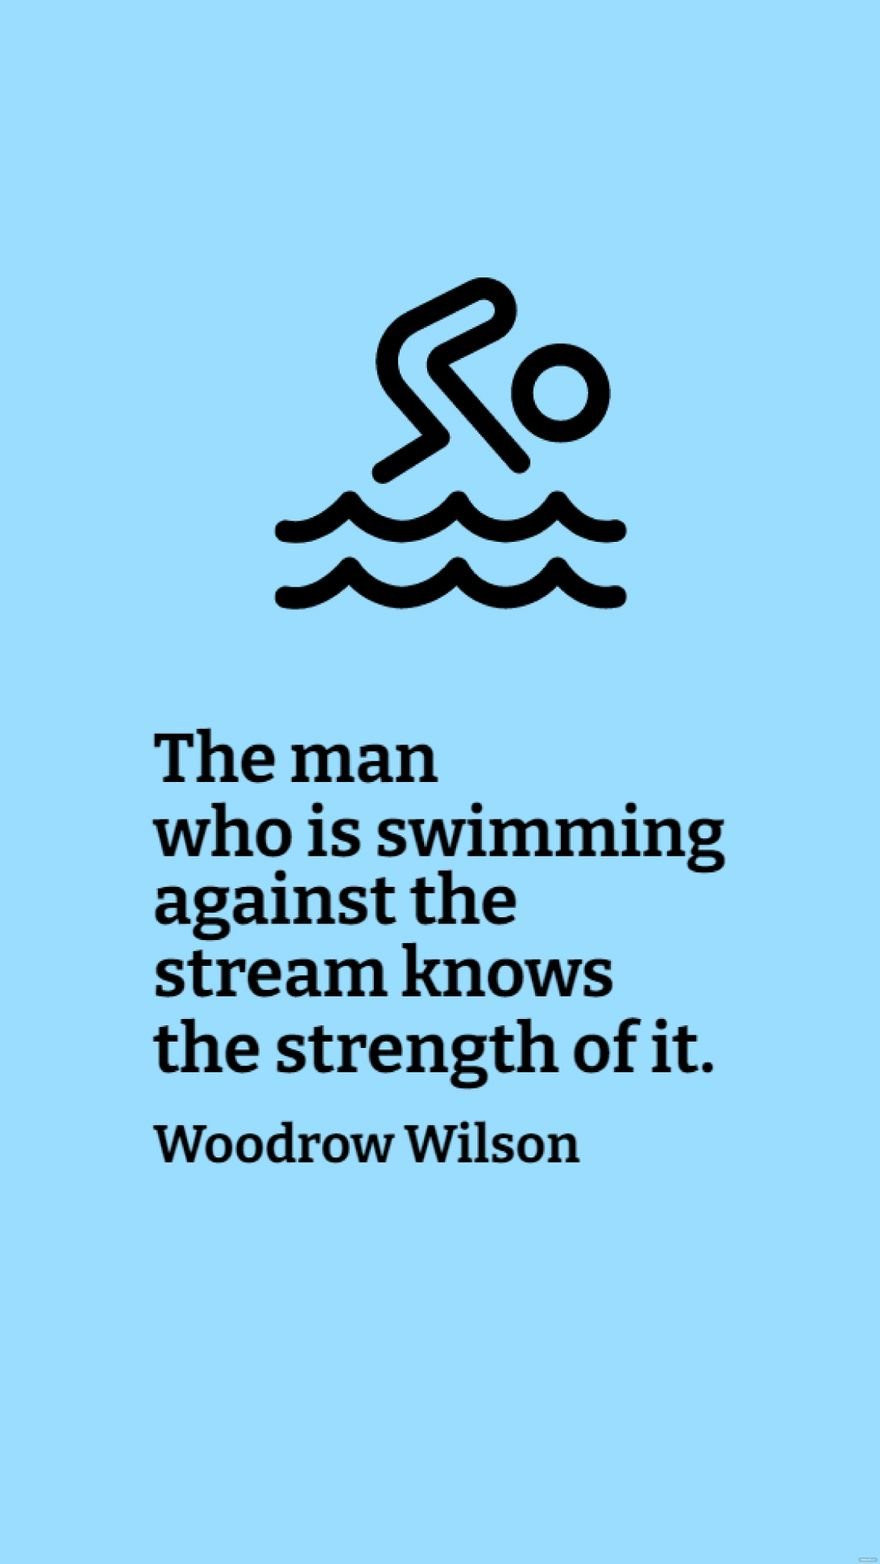 Free Woodrow Wilson - The man who is swimming against the stream knows the strength of it. in JPG